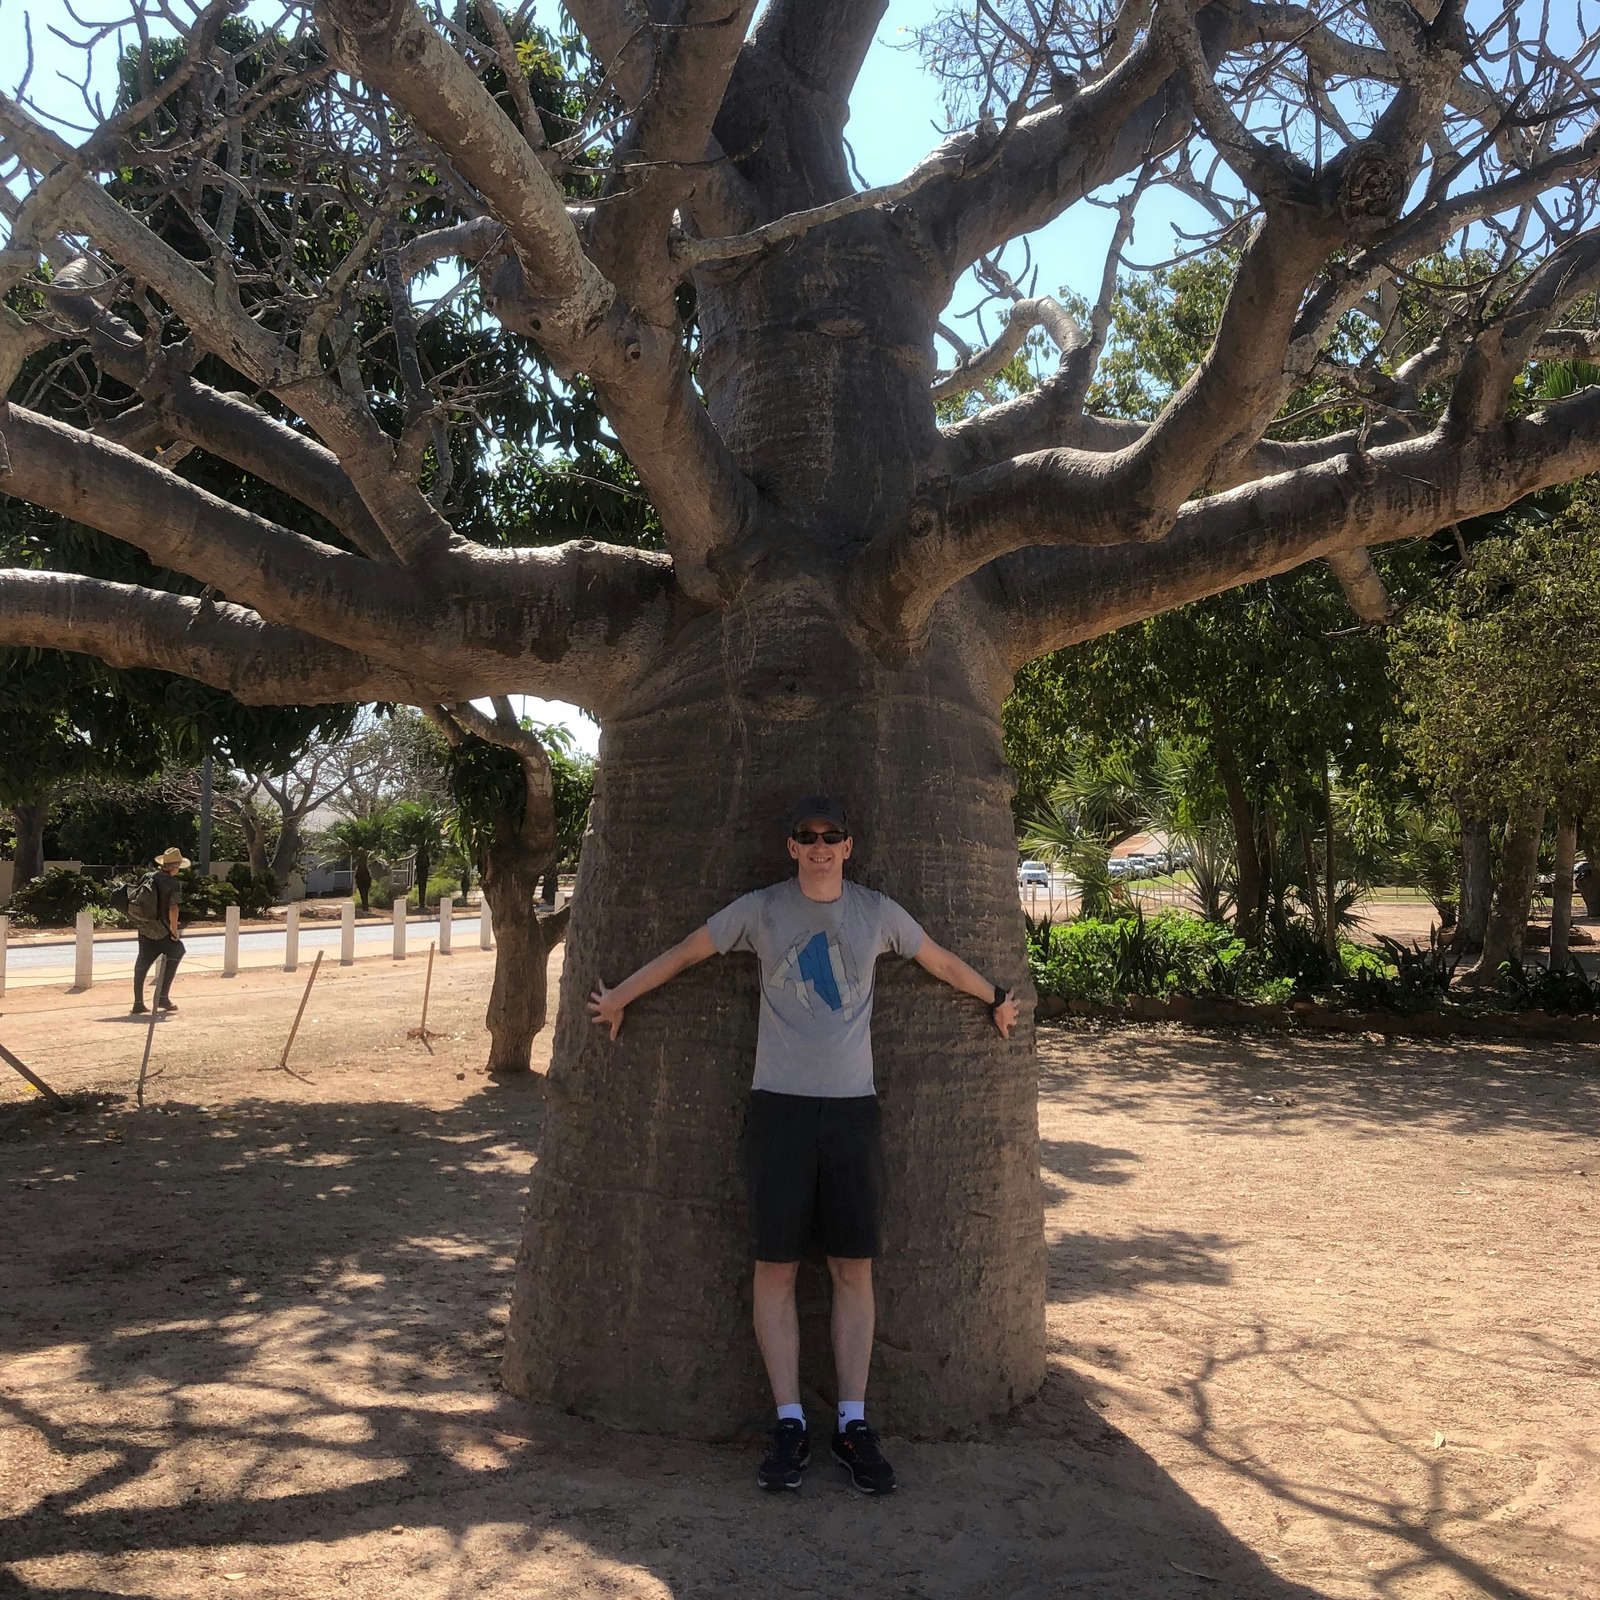 Photo of me against a Boab tree in Broome, Western Australia